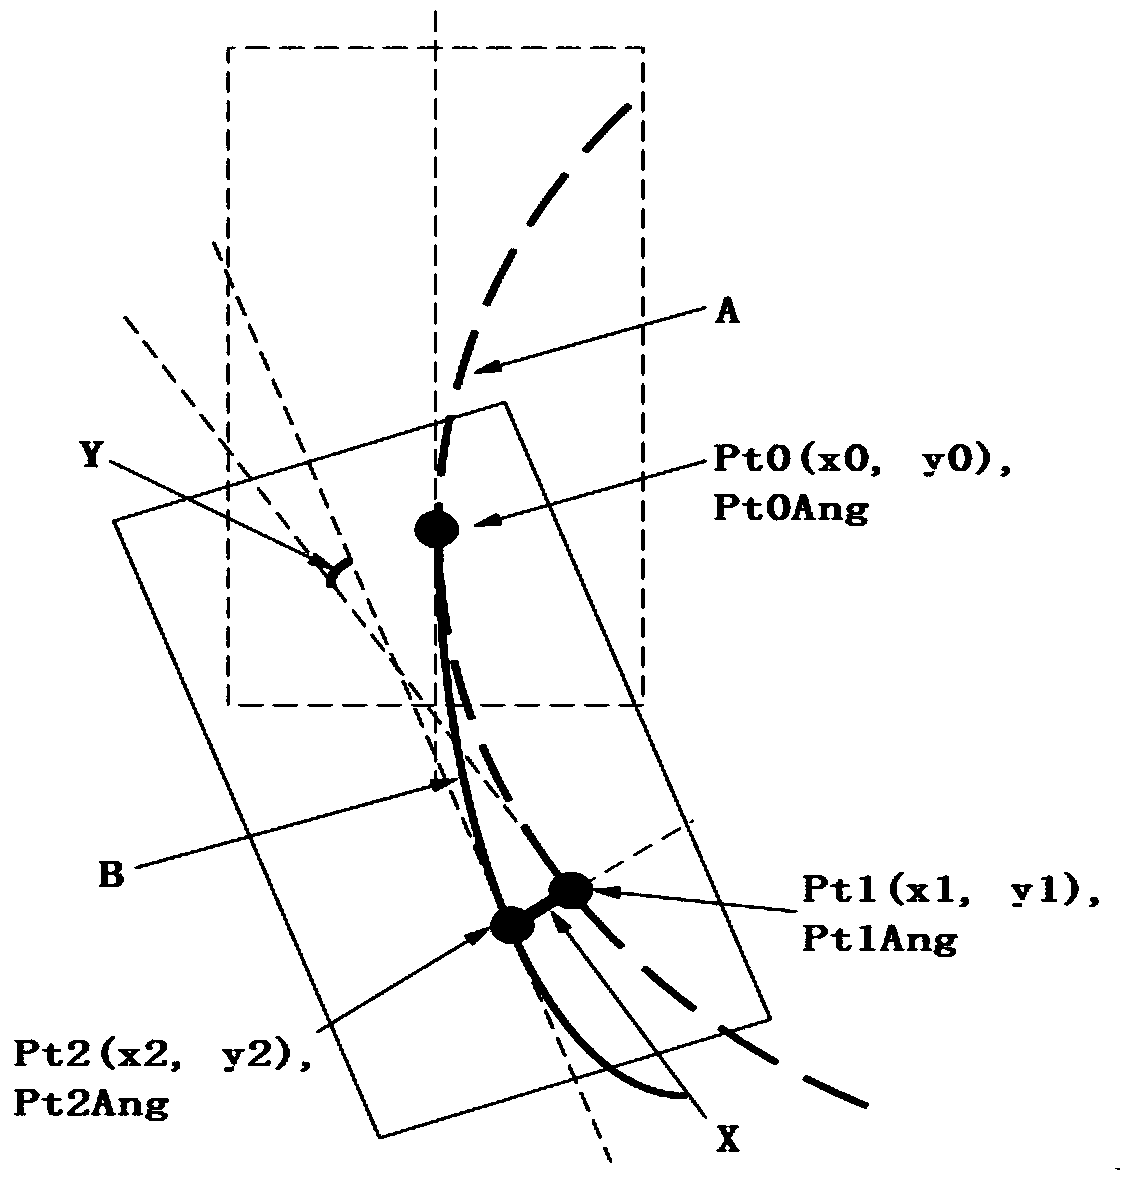 A method for correcting parking trajectory